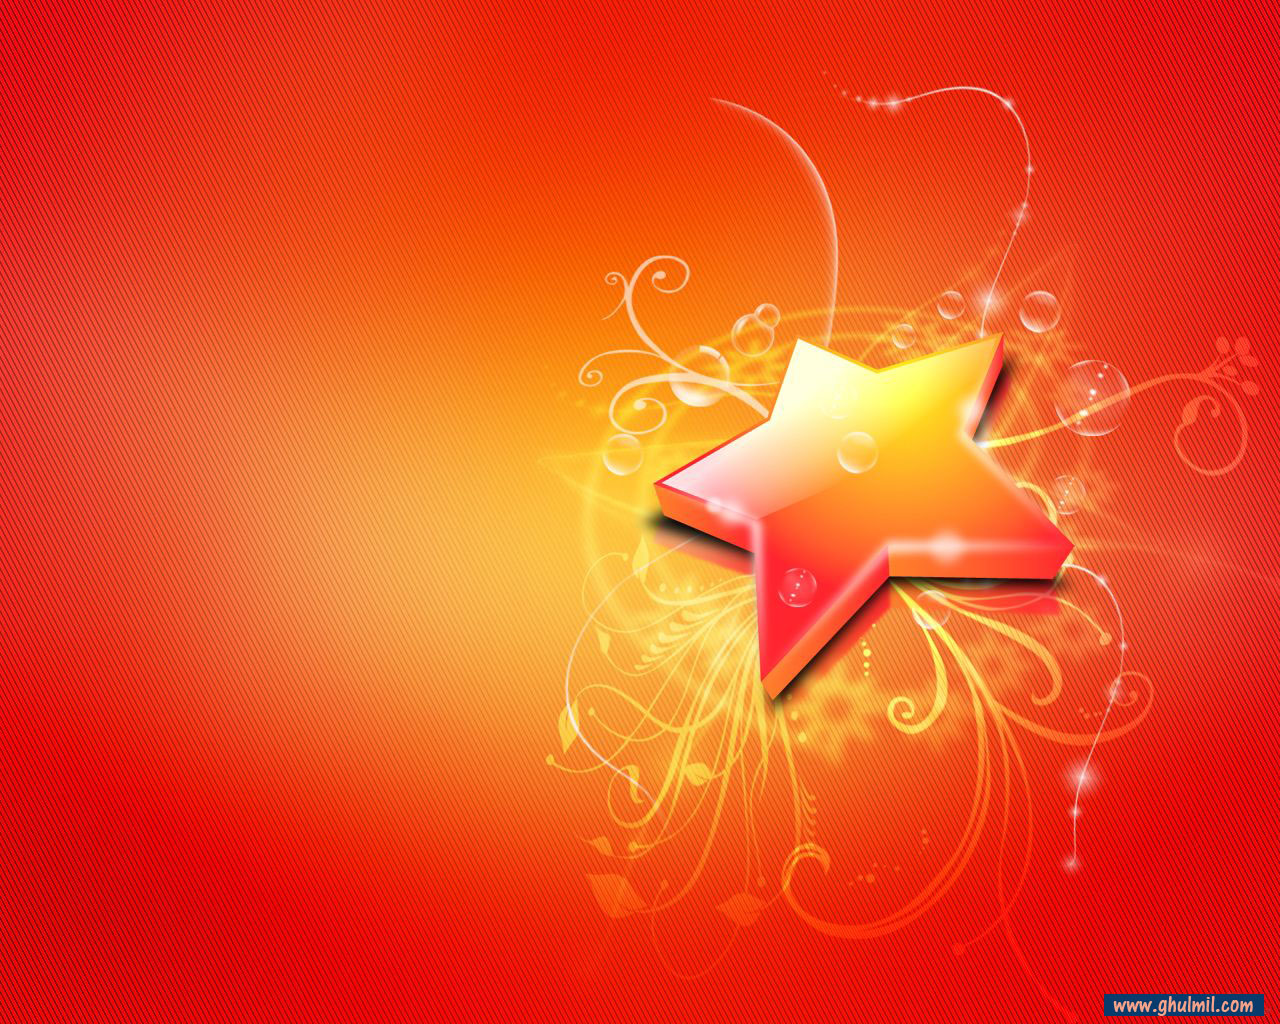  hd quality star wallpaper for laptops background E Entertainment